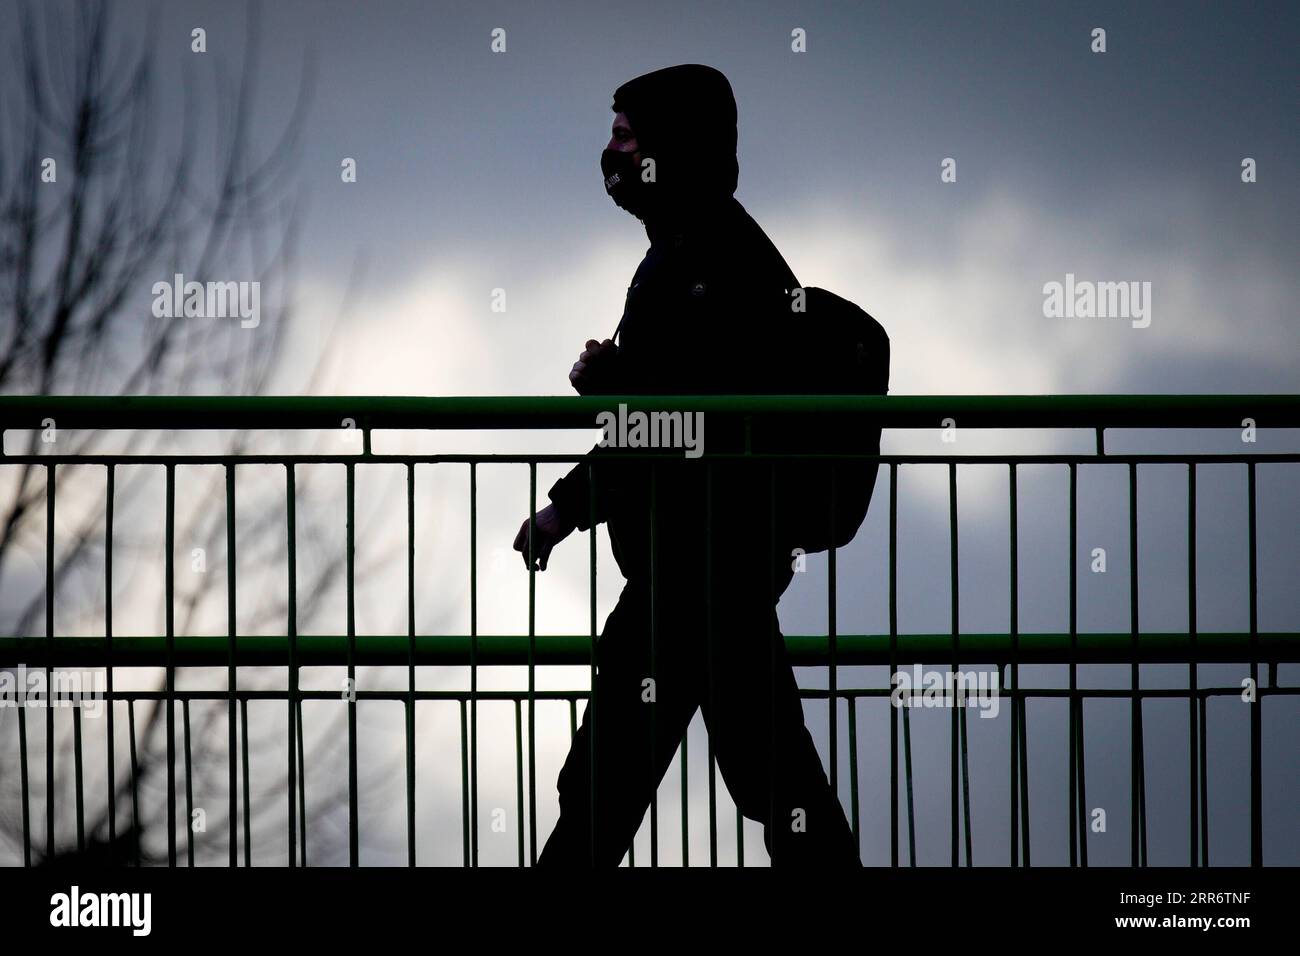 210228 -- WARSAW, Feb. 28, 2021 -- A man wearing a face mask is seen crossing a bridge in Warsaw, Poland, on Feb. 27, 2021. The Polish government announced new restrictions on Wednesday in an effort to curb a recent rise in new COVID-19 infections officially dubbed the third wave. Health Minister Adam Niedzielski said that the rules on face covering will be tightened, mandating the use of masks in public spaces starting on Saturday instead of the previously allowed alternatives, such as scarfs and visors. Also starting on Saturday, travelers from southern neighbours Slovakia and the Czech Repu Stock Photo